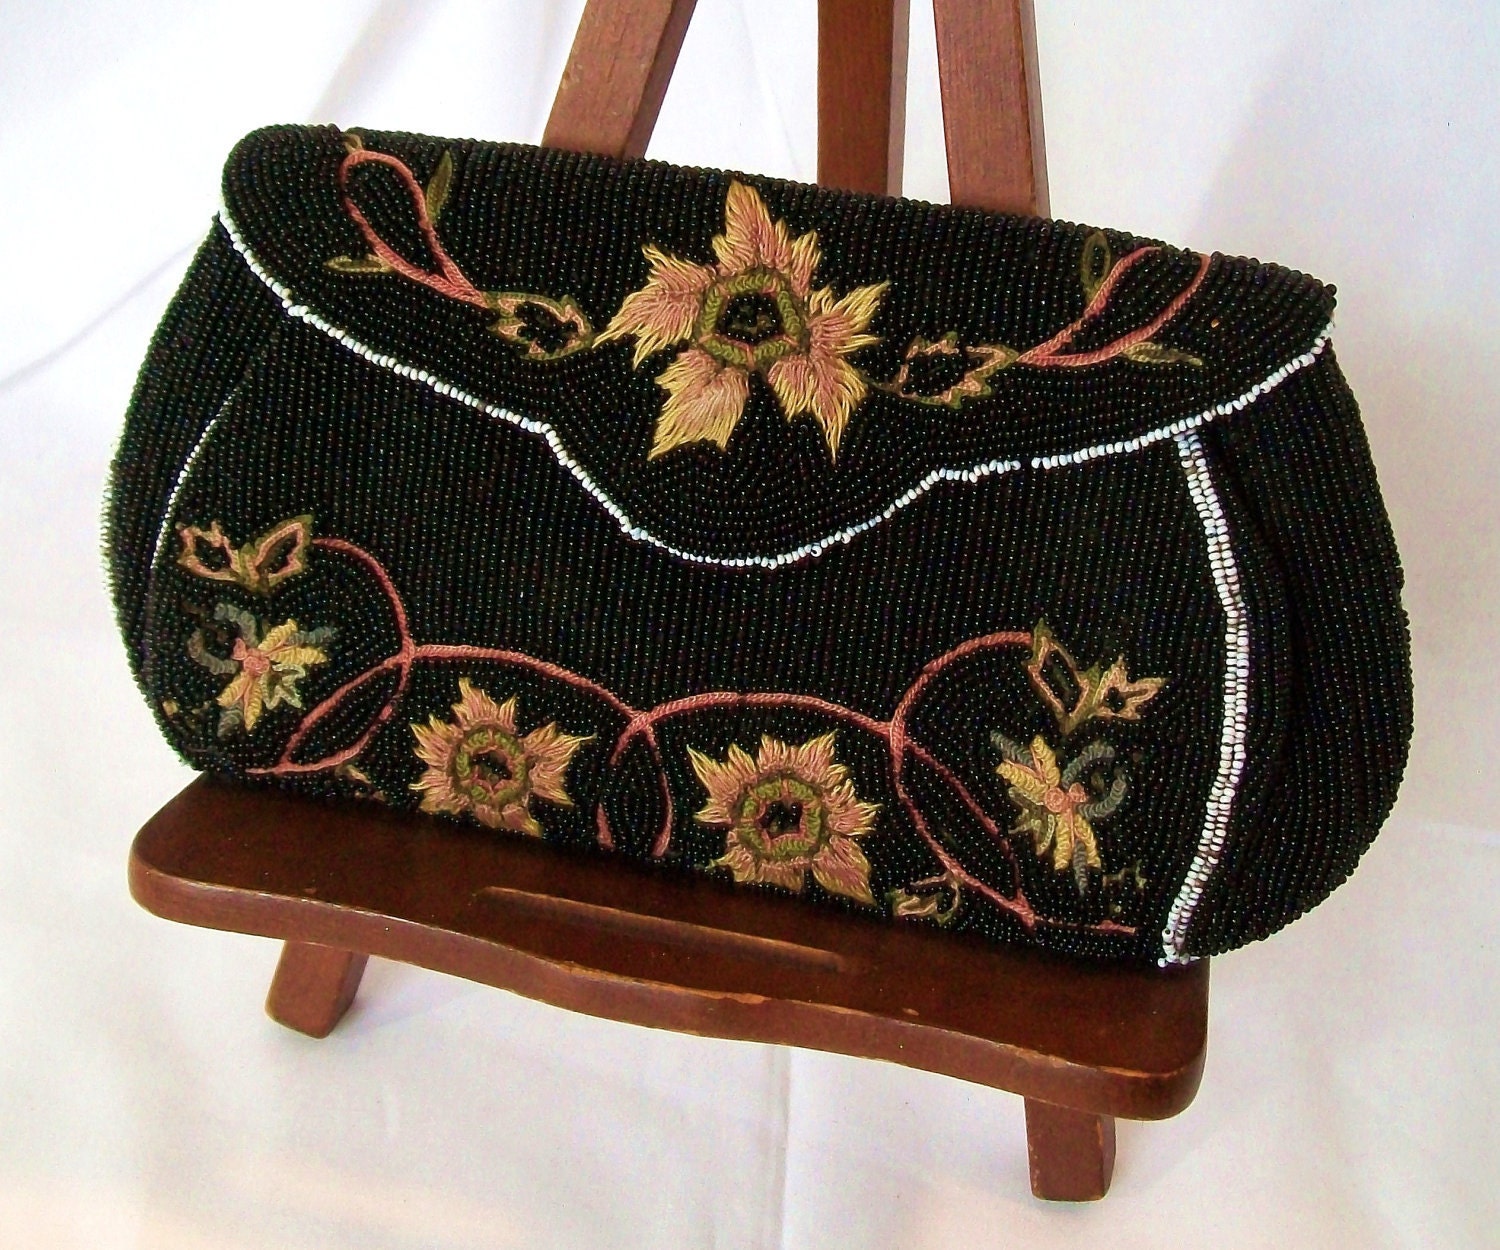 Vintage Beaded Clutch Purse Black Hand Bag with by pinkpainter